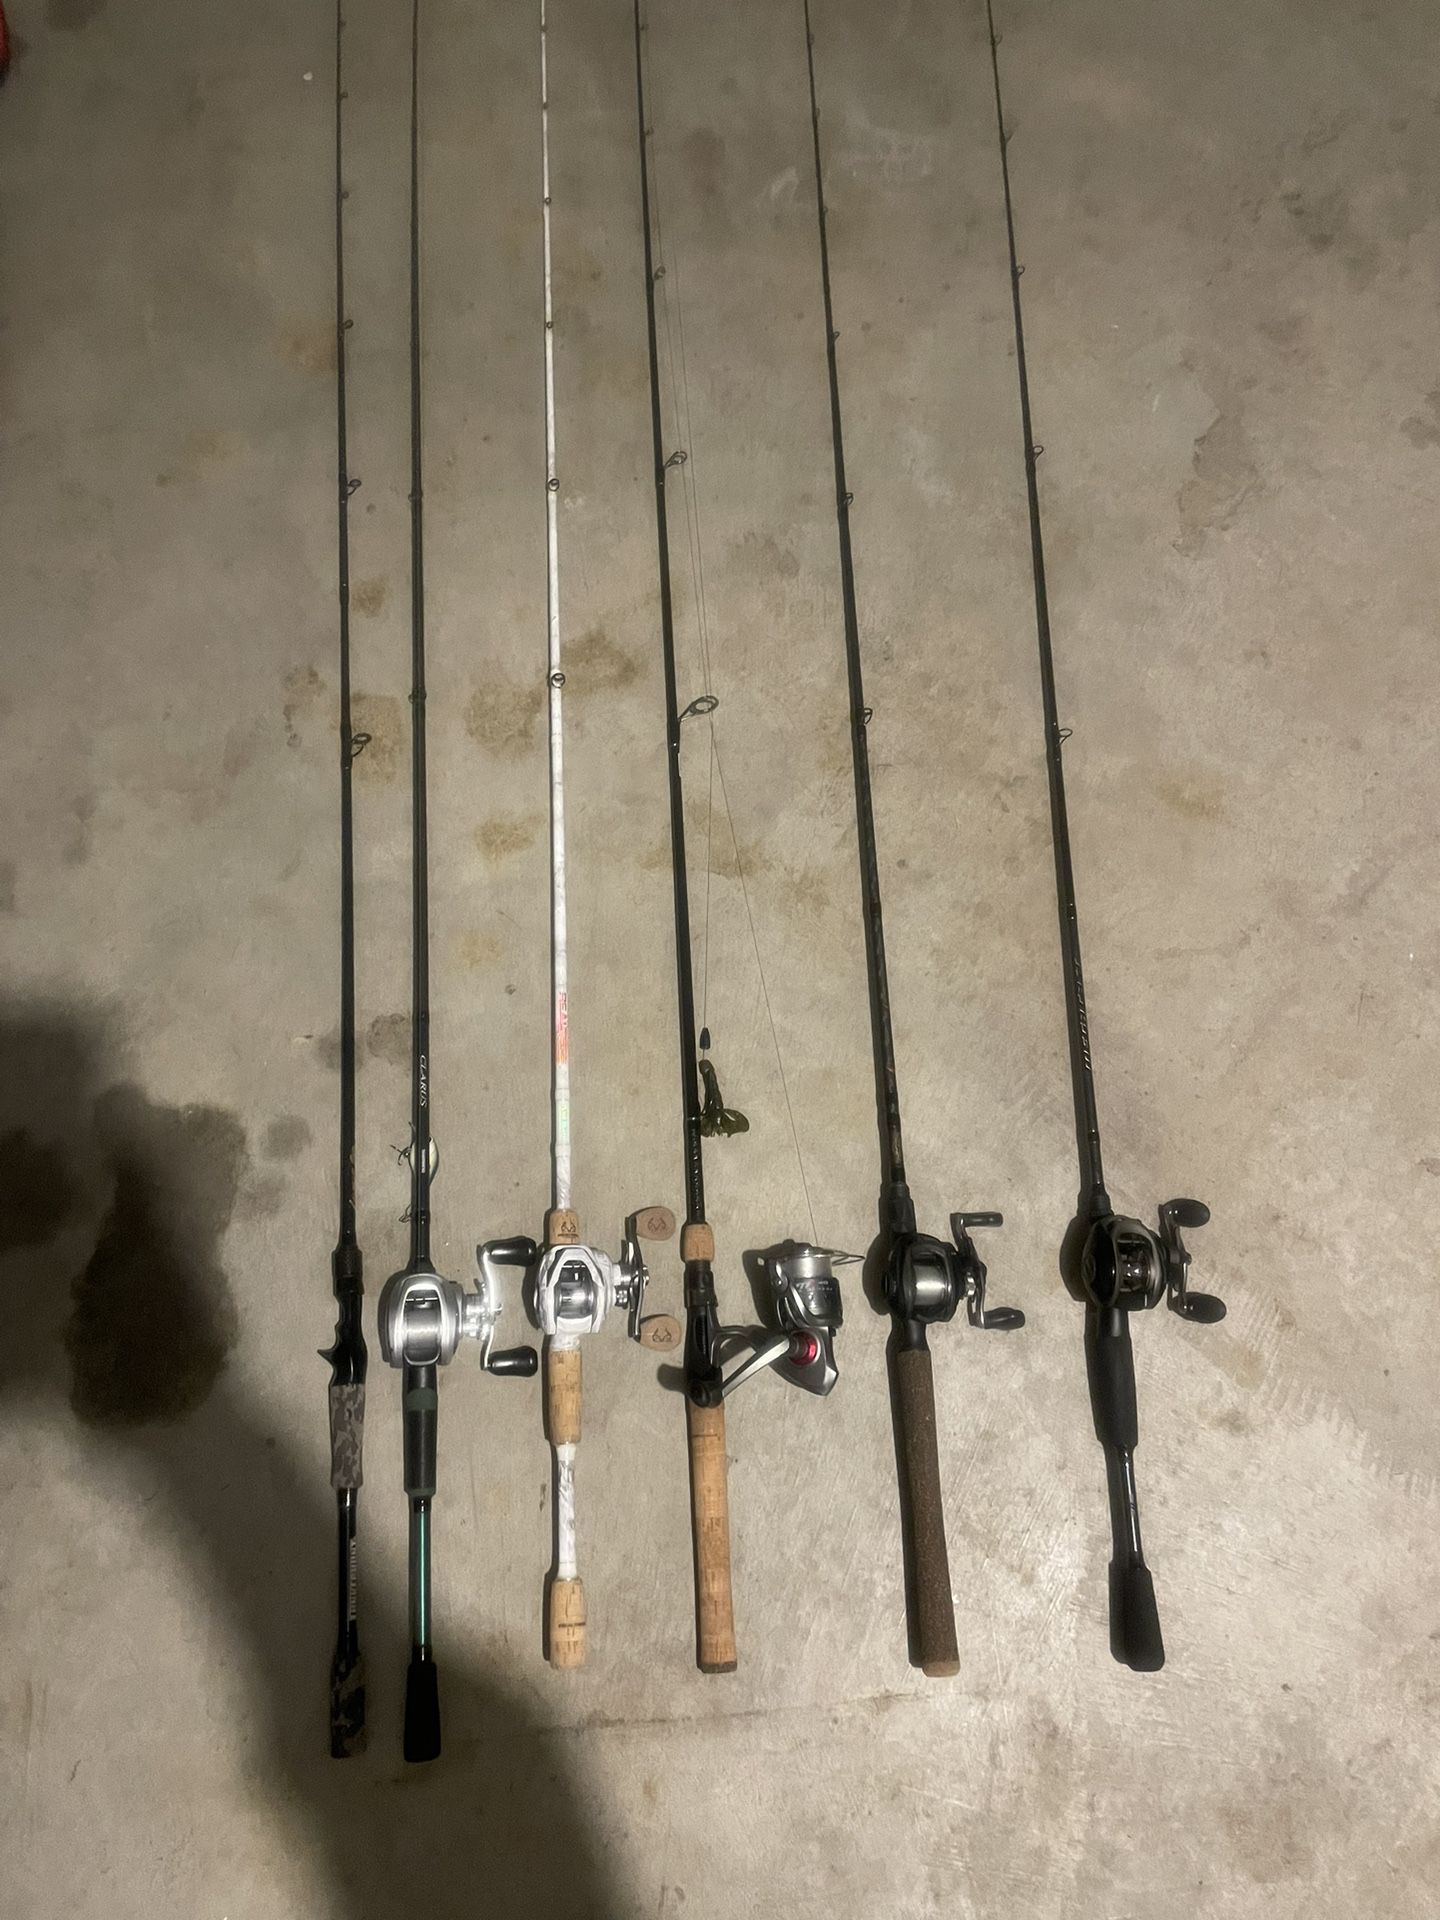 Bass Rods For Sale